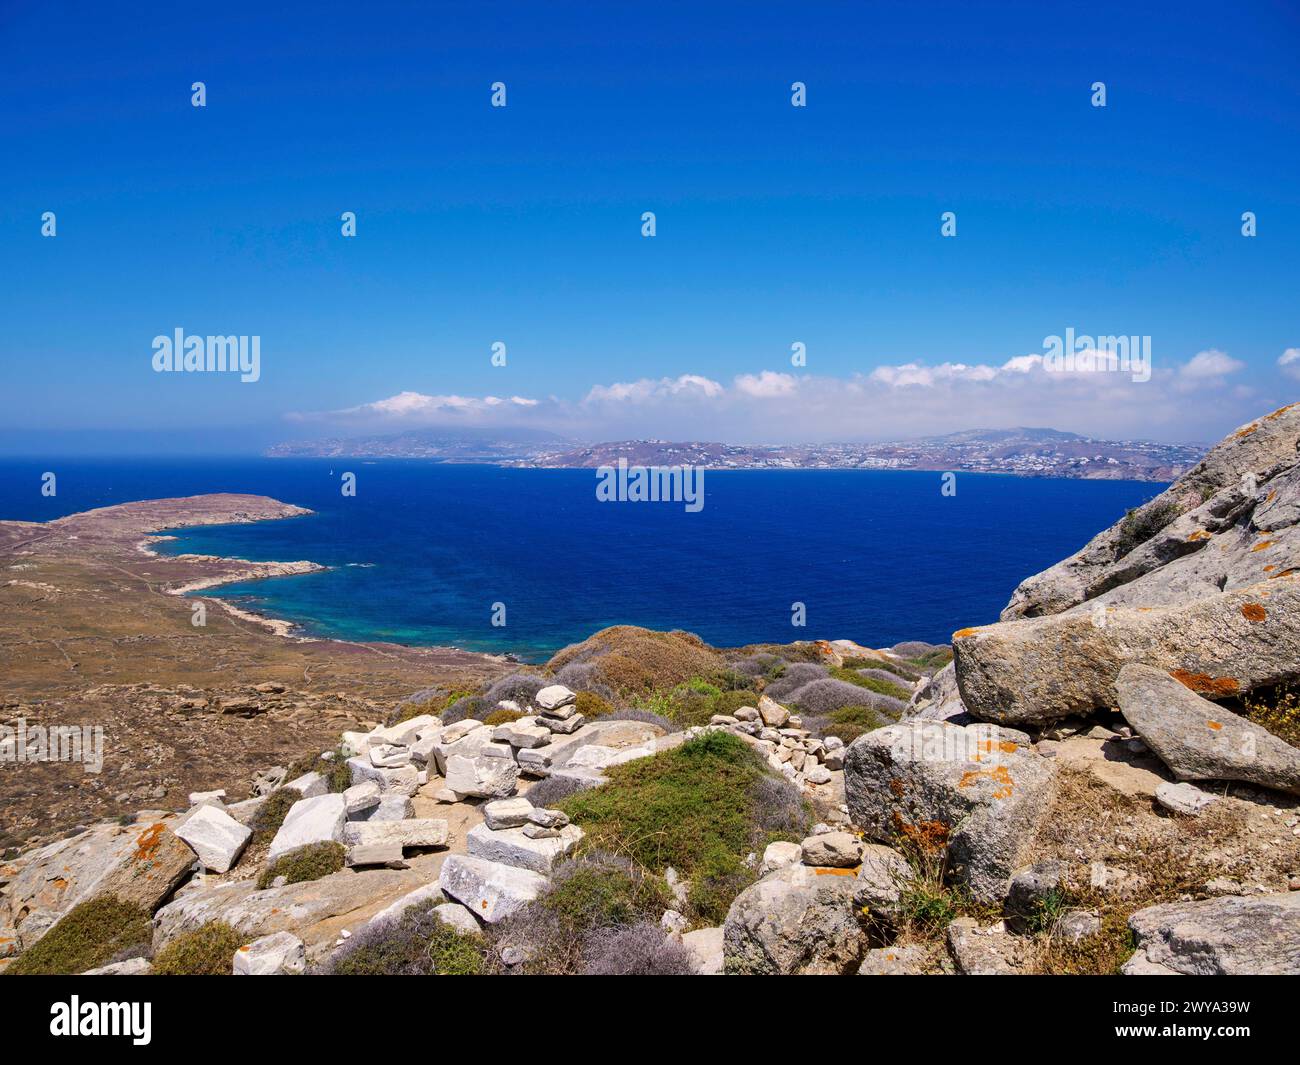 View from Mount Kynthos, Delos Archaeological Site, UNESCO World Heritage Site, Delos Island, Cyclades, Greek Islands, Greece, Europe Copyright: Karol Stock Photo